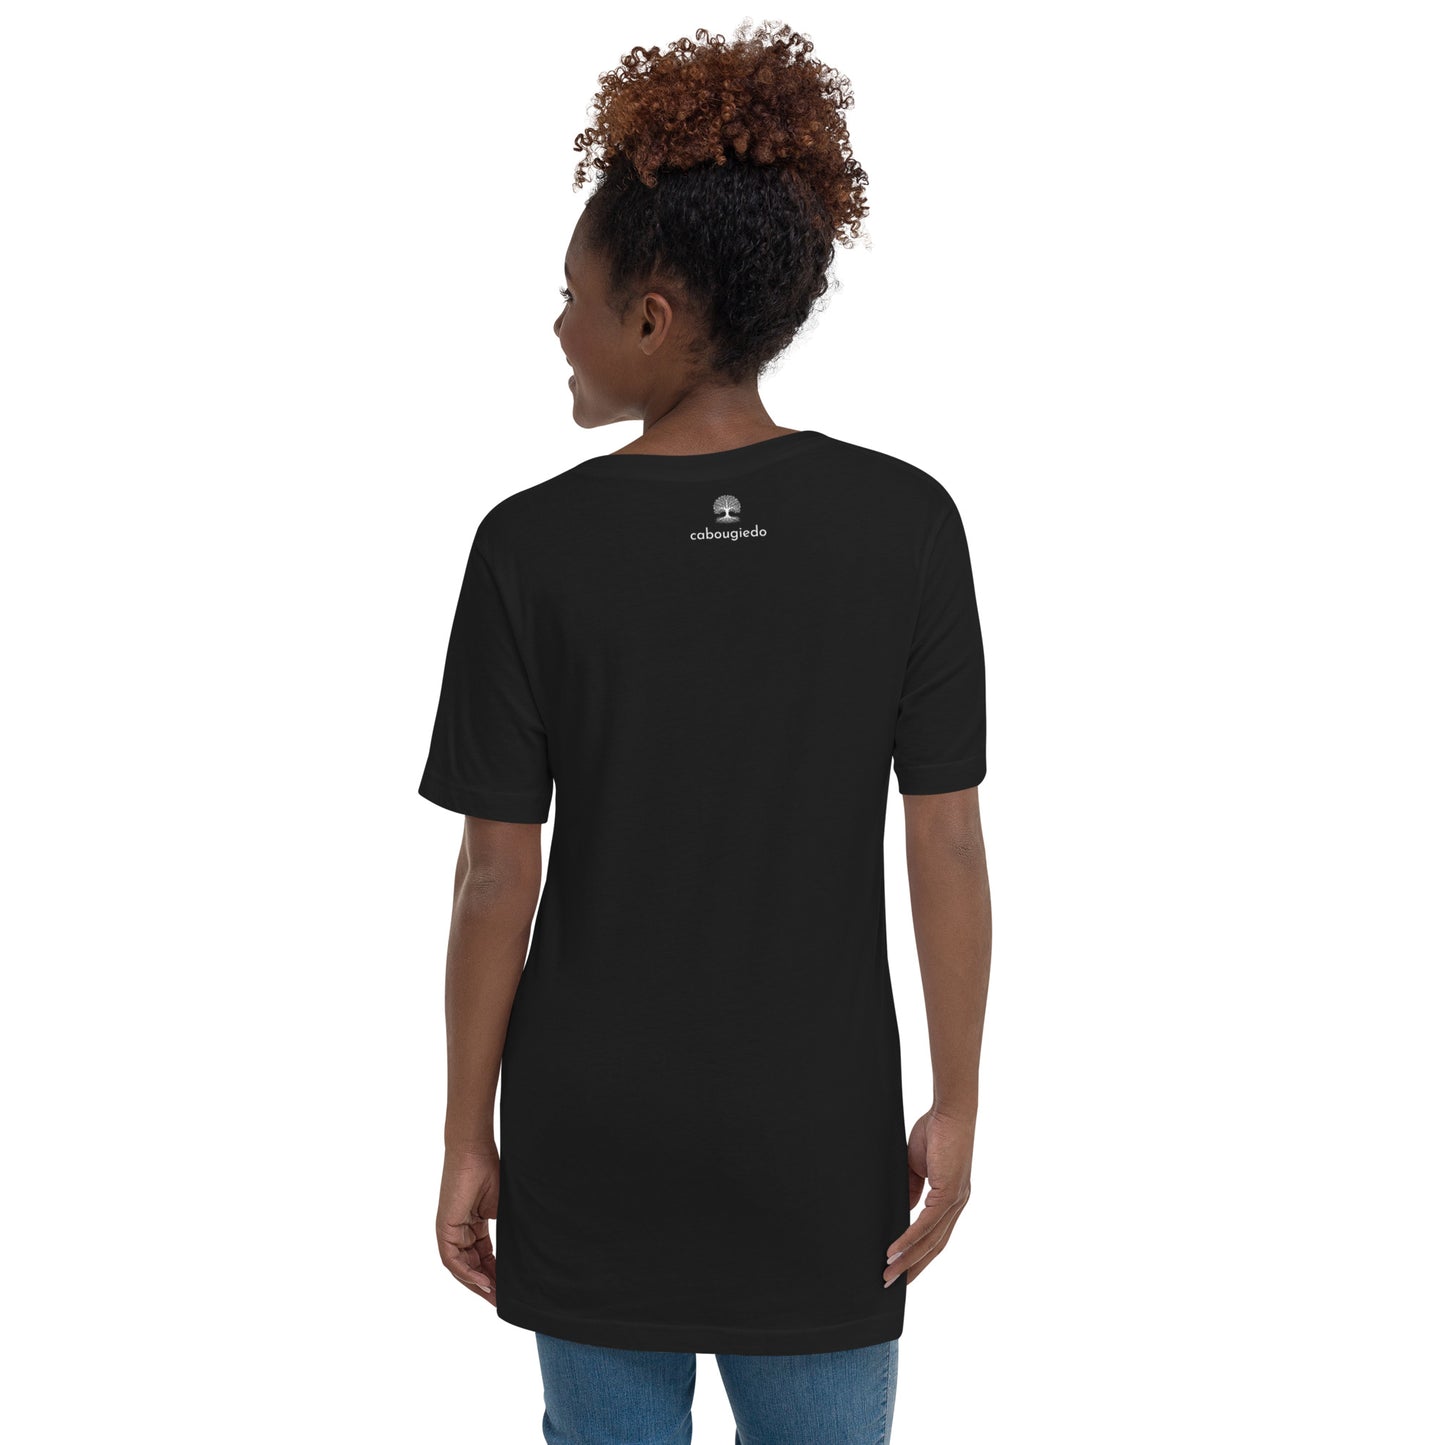 Unisex Short Sleeve V-Neck T-Shirt - Steppin In to Black History Month